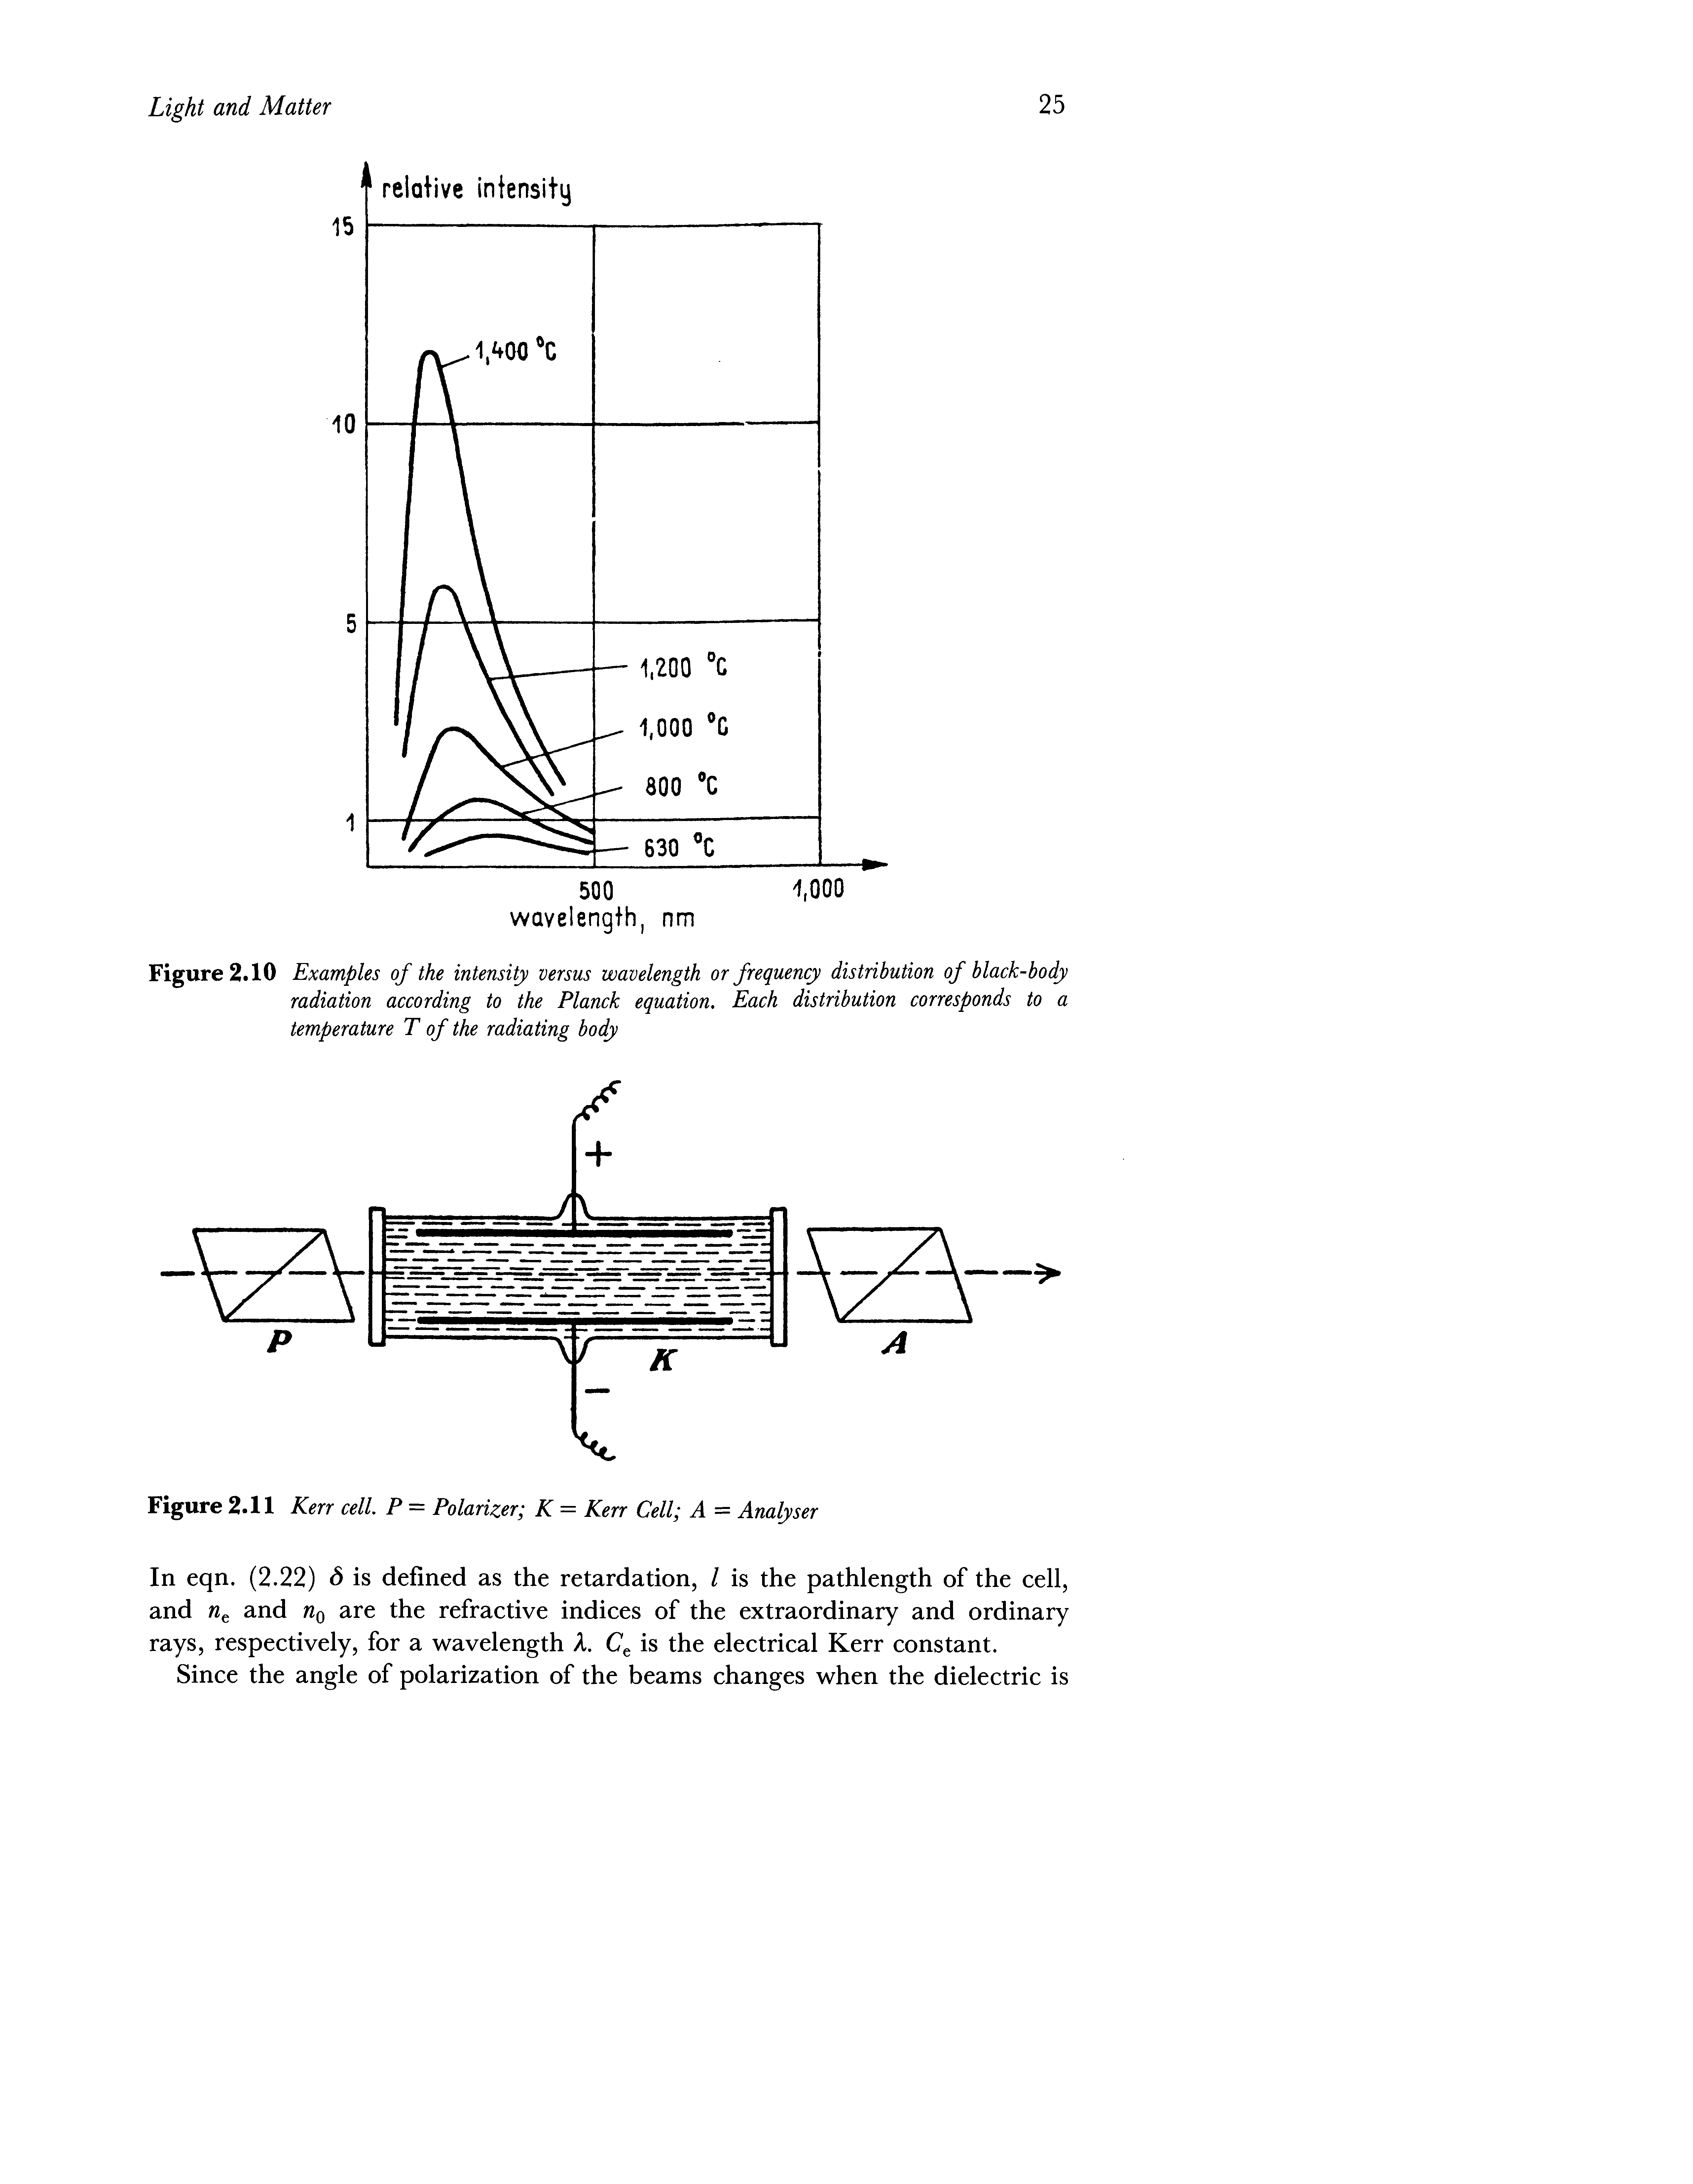 Figure 2.10 Examples of the intensity versus wavelength or frequency distribution of black-body radiation according to the Planck equation. Each distribution corresponds to a temperature T of the radiating body...